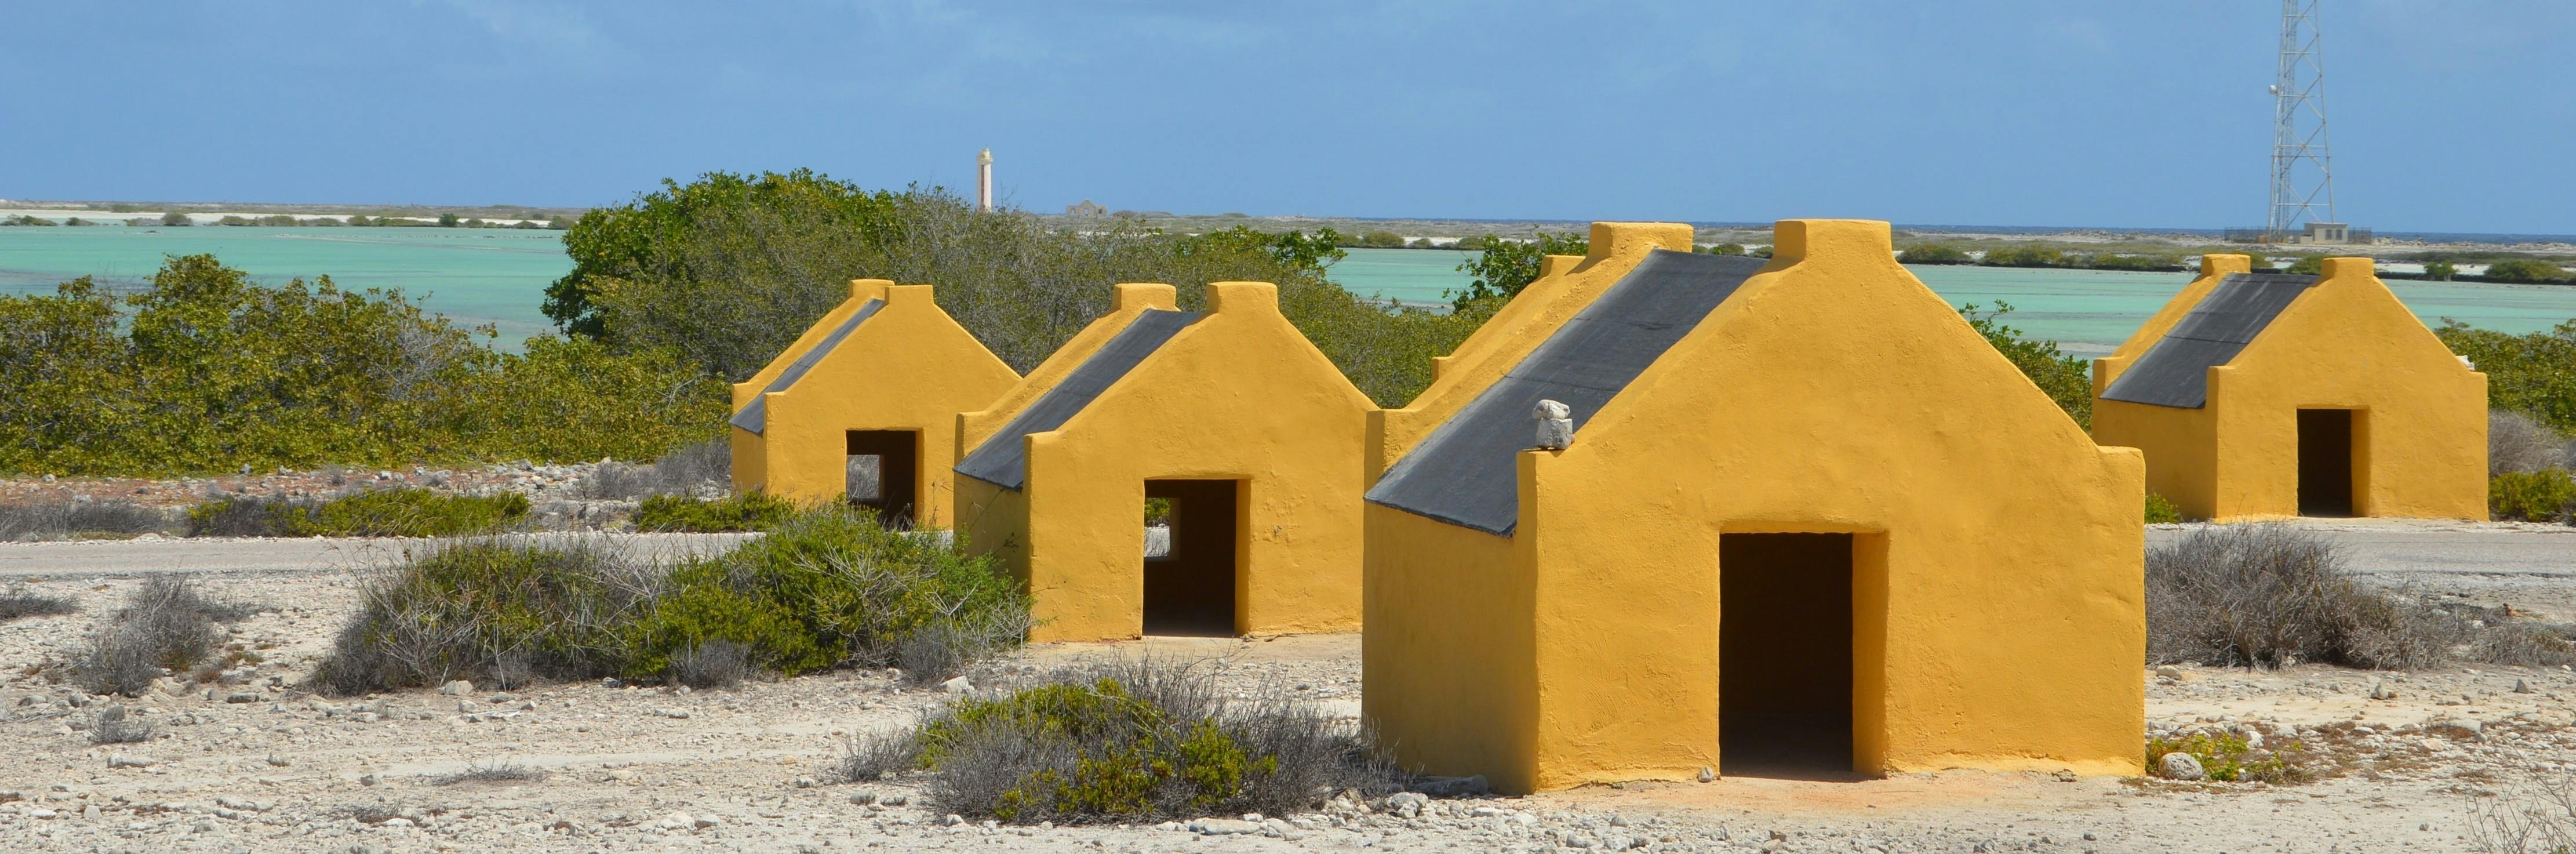 Discover Bonaire on a guided island tour